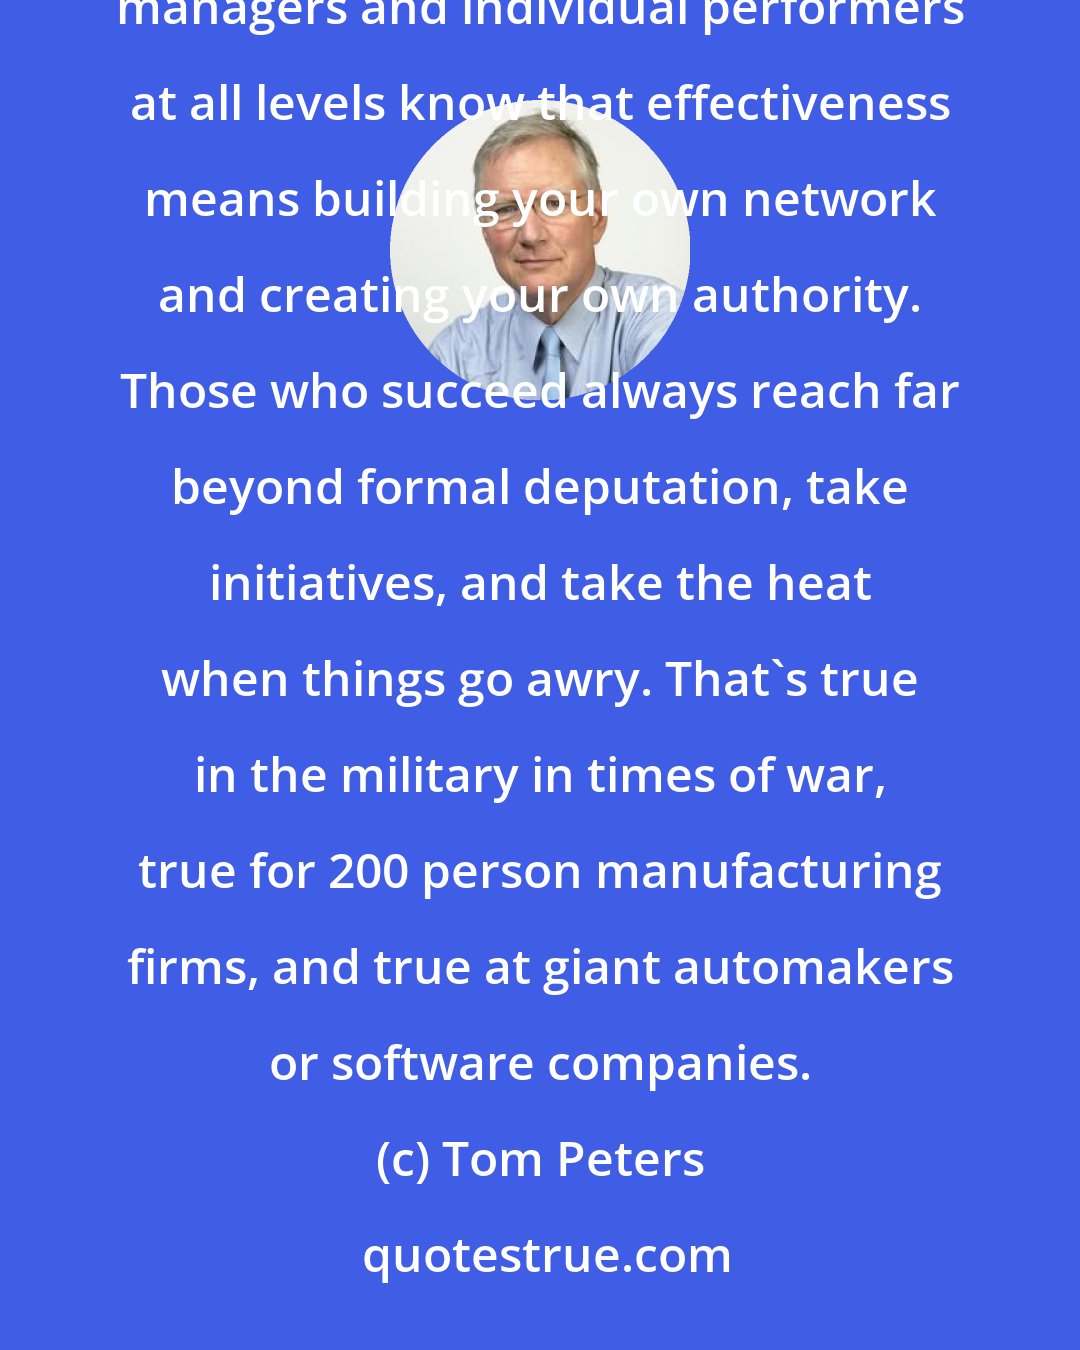 Tom Peters: Authority never matches responsibility. That's one of the great myths and delusions of all times. Winning managers and individual performers at all levels know that effectiveness means building your own network and creating your own authority. Those who succeed always reach far beyond formal deputation, take initiatives, and take the heat when things go awry. That's true in the military in times of war, true for 200 person manufacturing firms, and true at giant automakers or software companies.